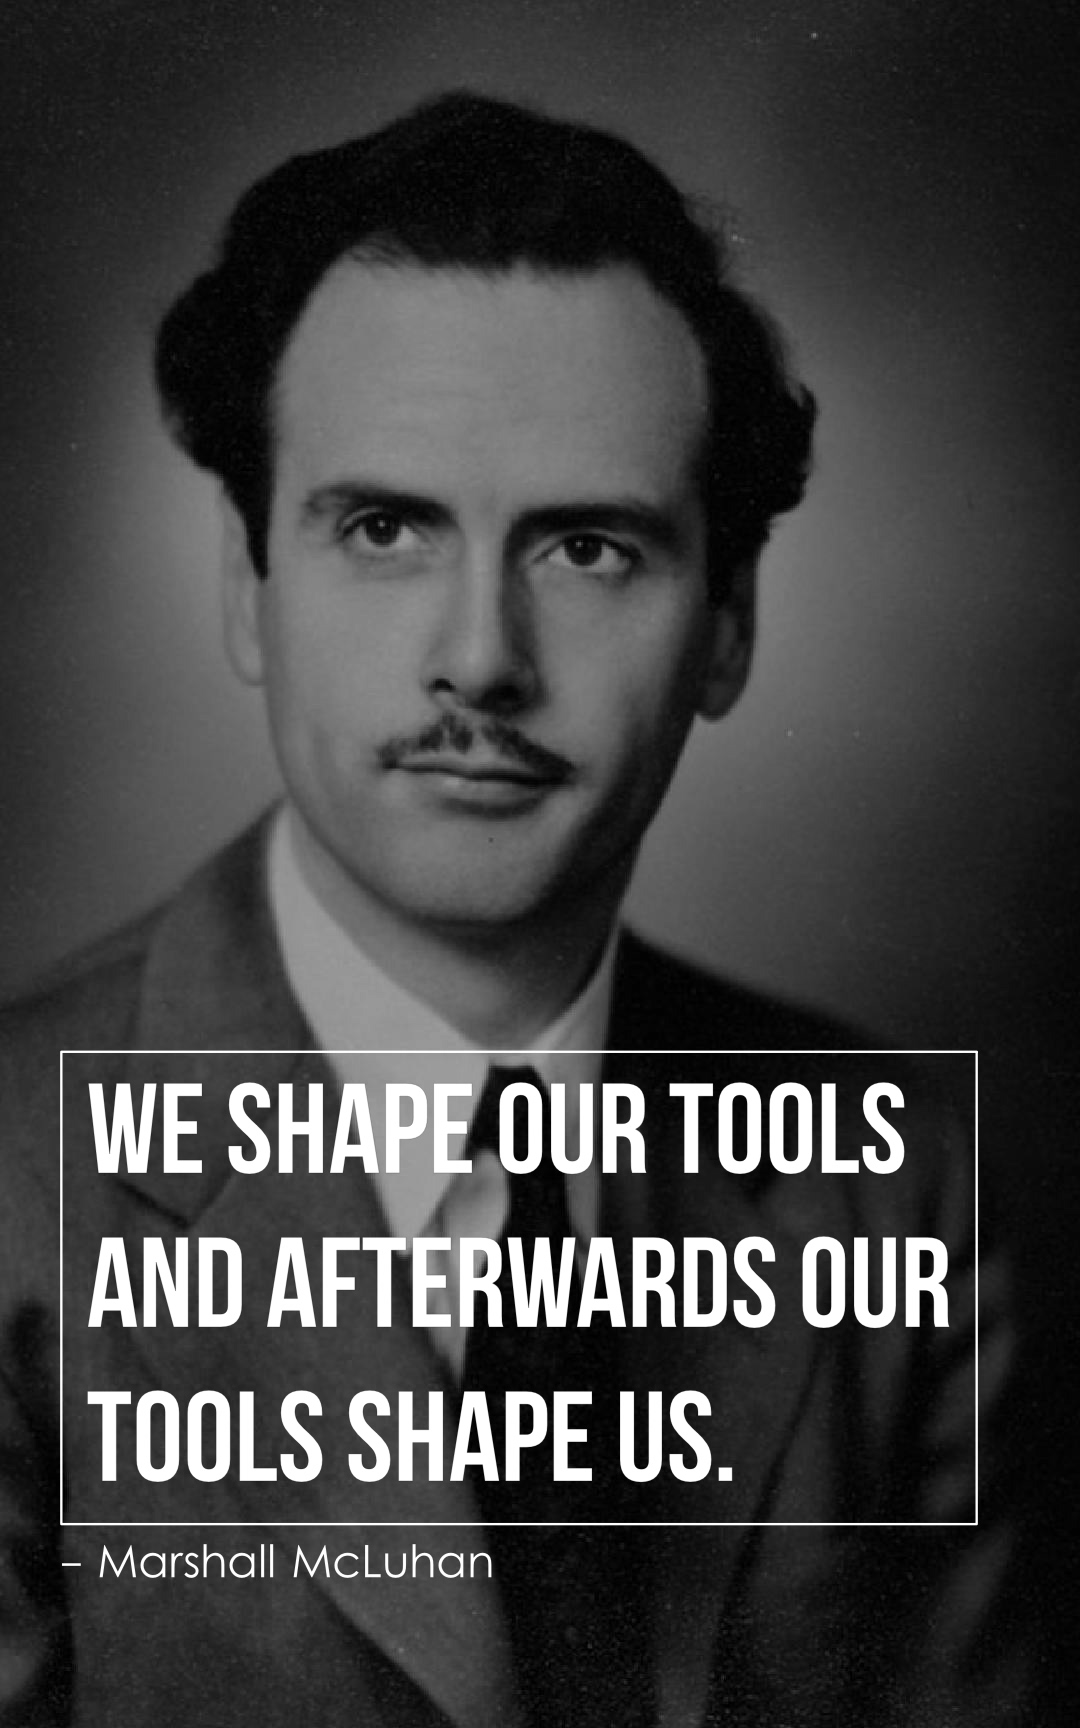 We shape our tools and afterwards our tools shape us.